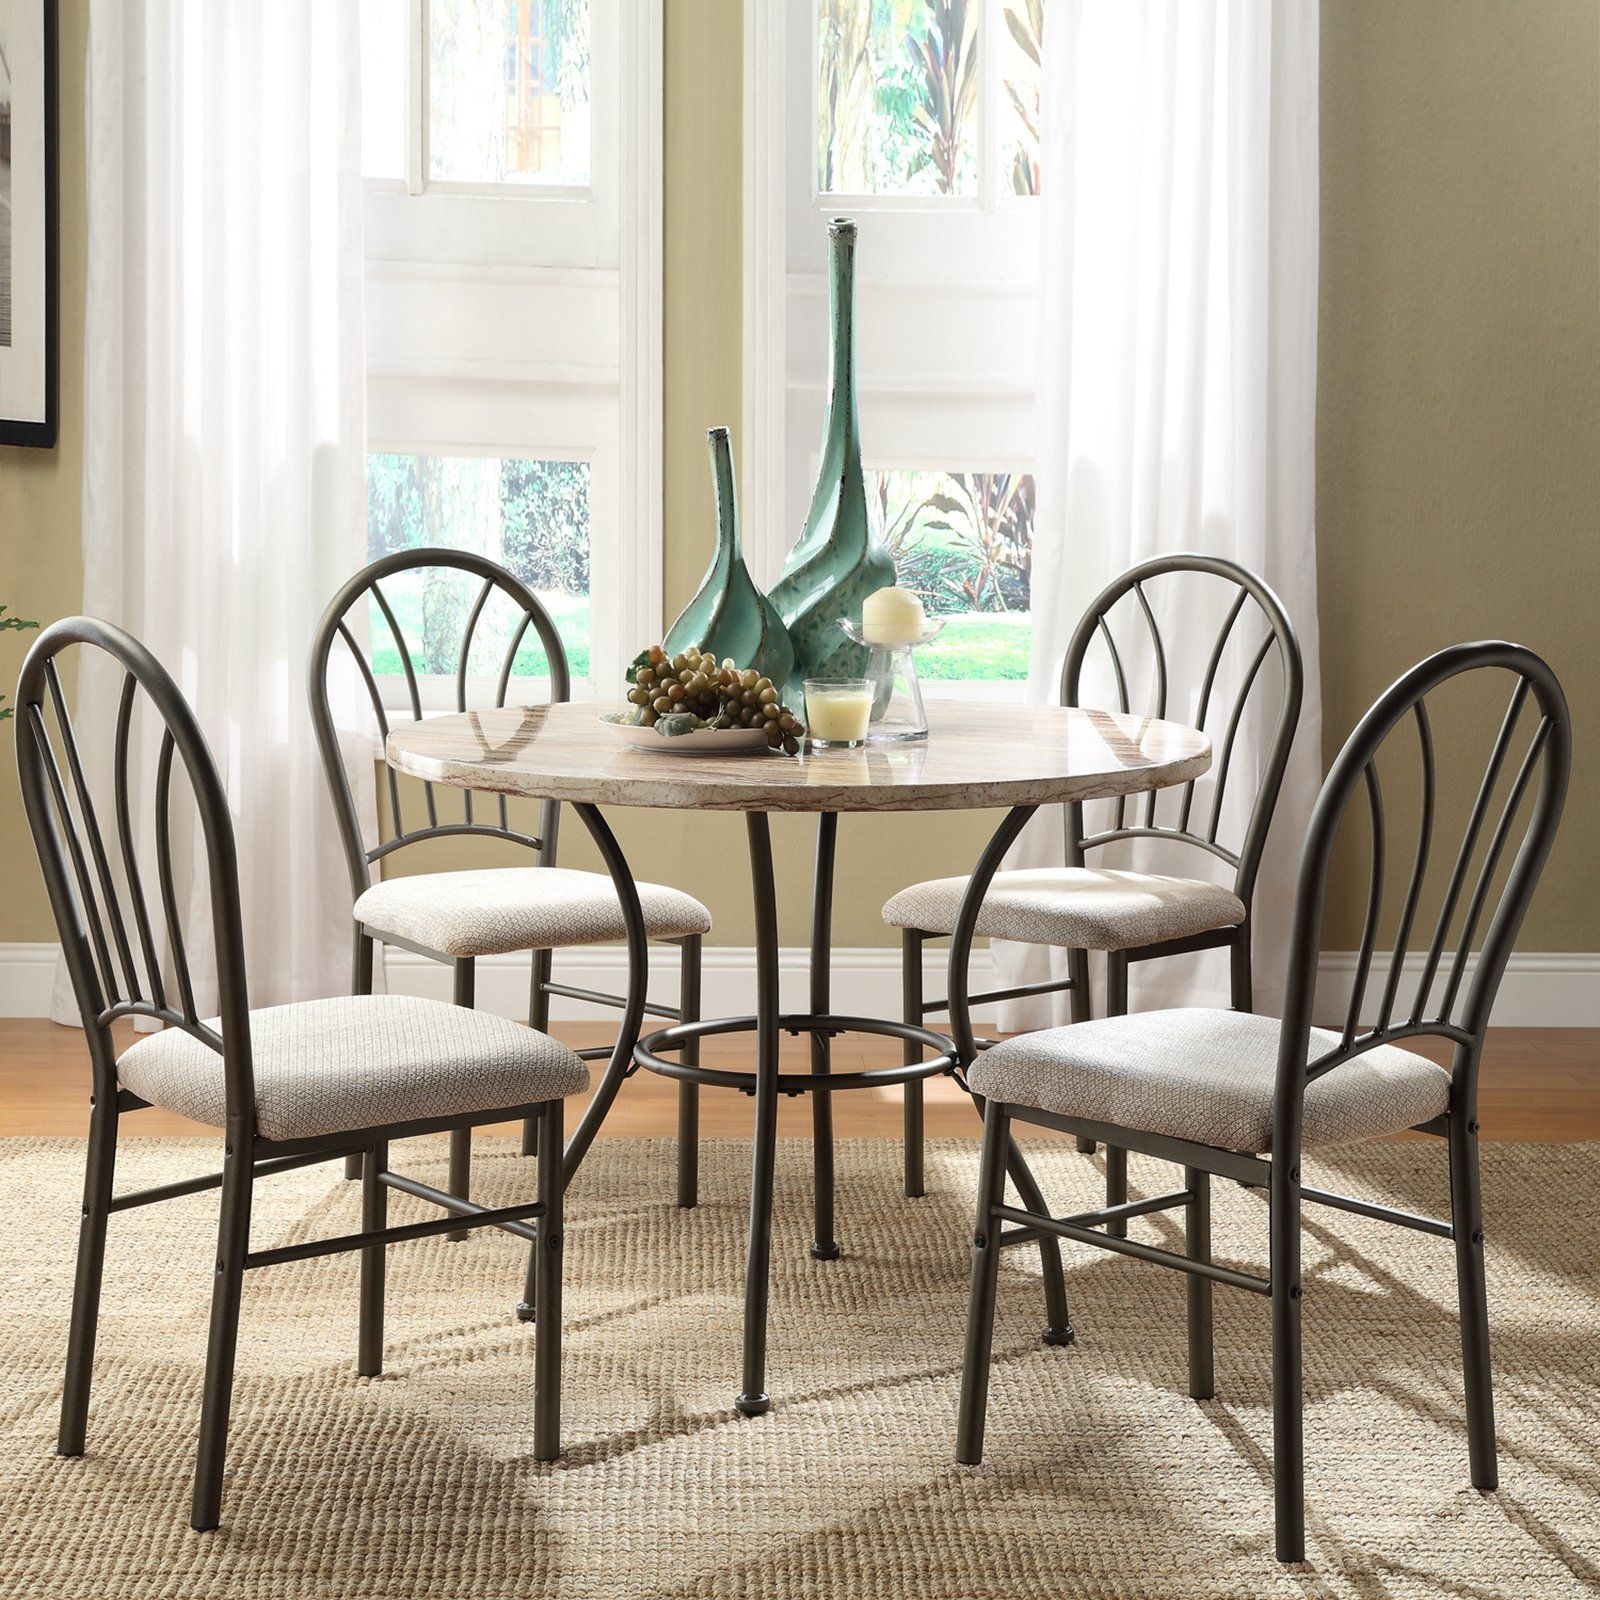 Take a look at this cream casual five piece dining